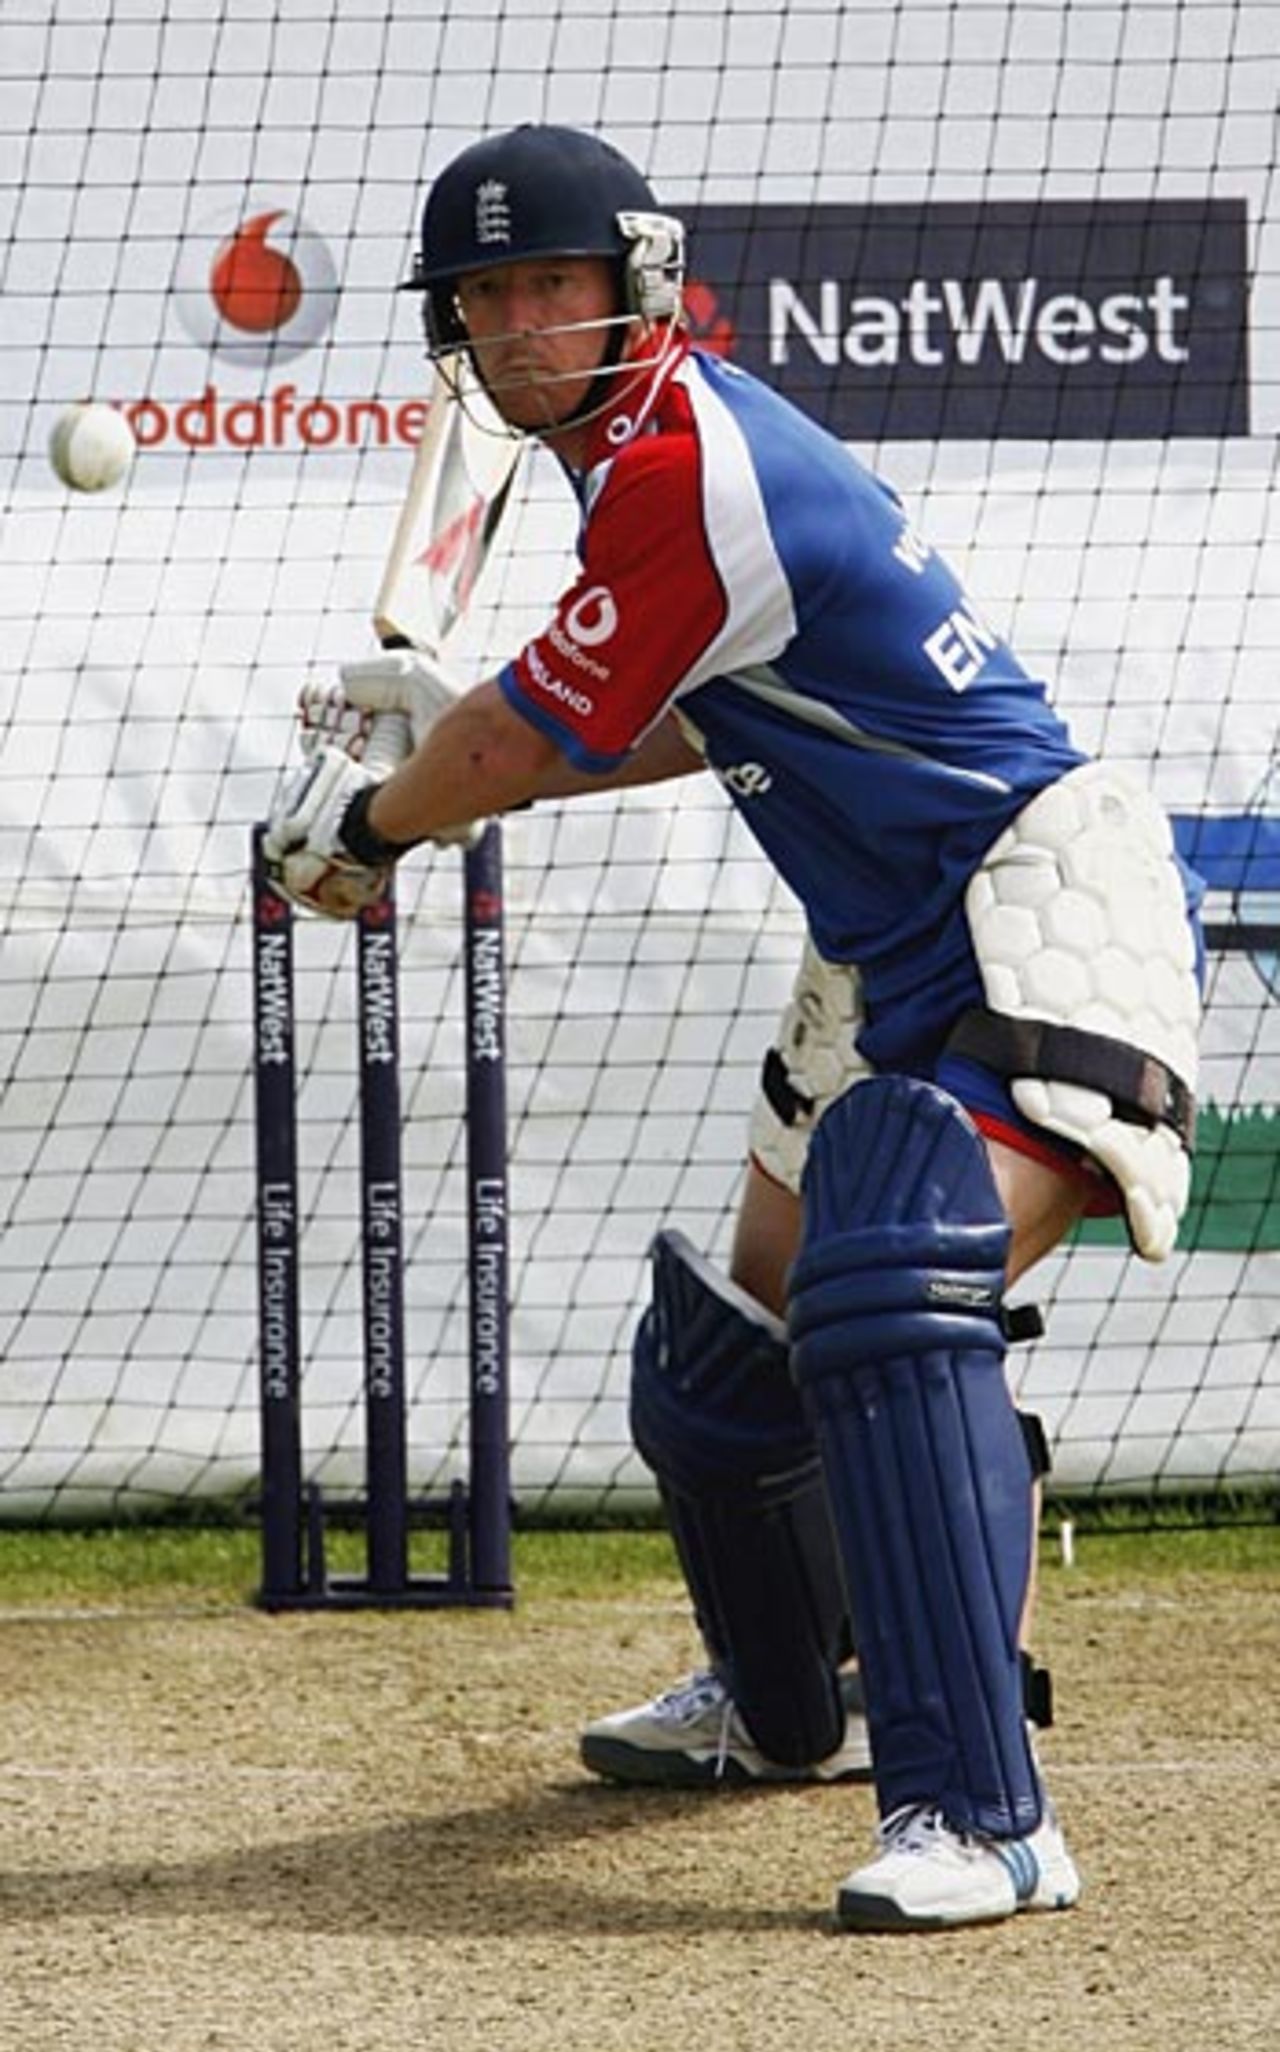 Paul Collingwood bats in the nets at his home ground ahead of England's 3rd one-dayer against Sri Lanka, Riverside, June 23, 2006